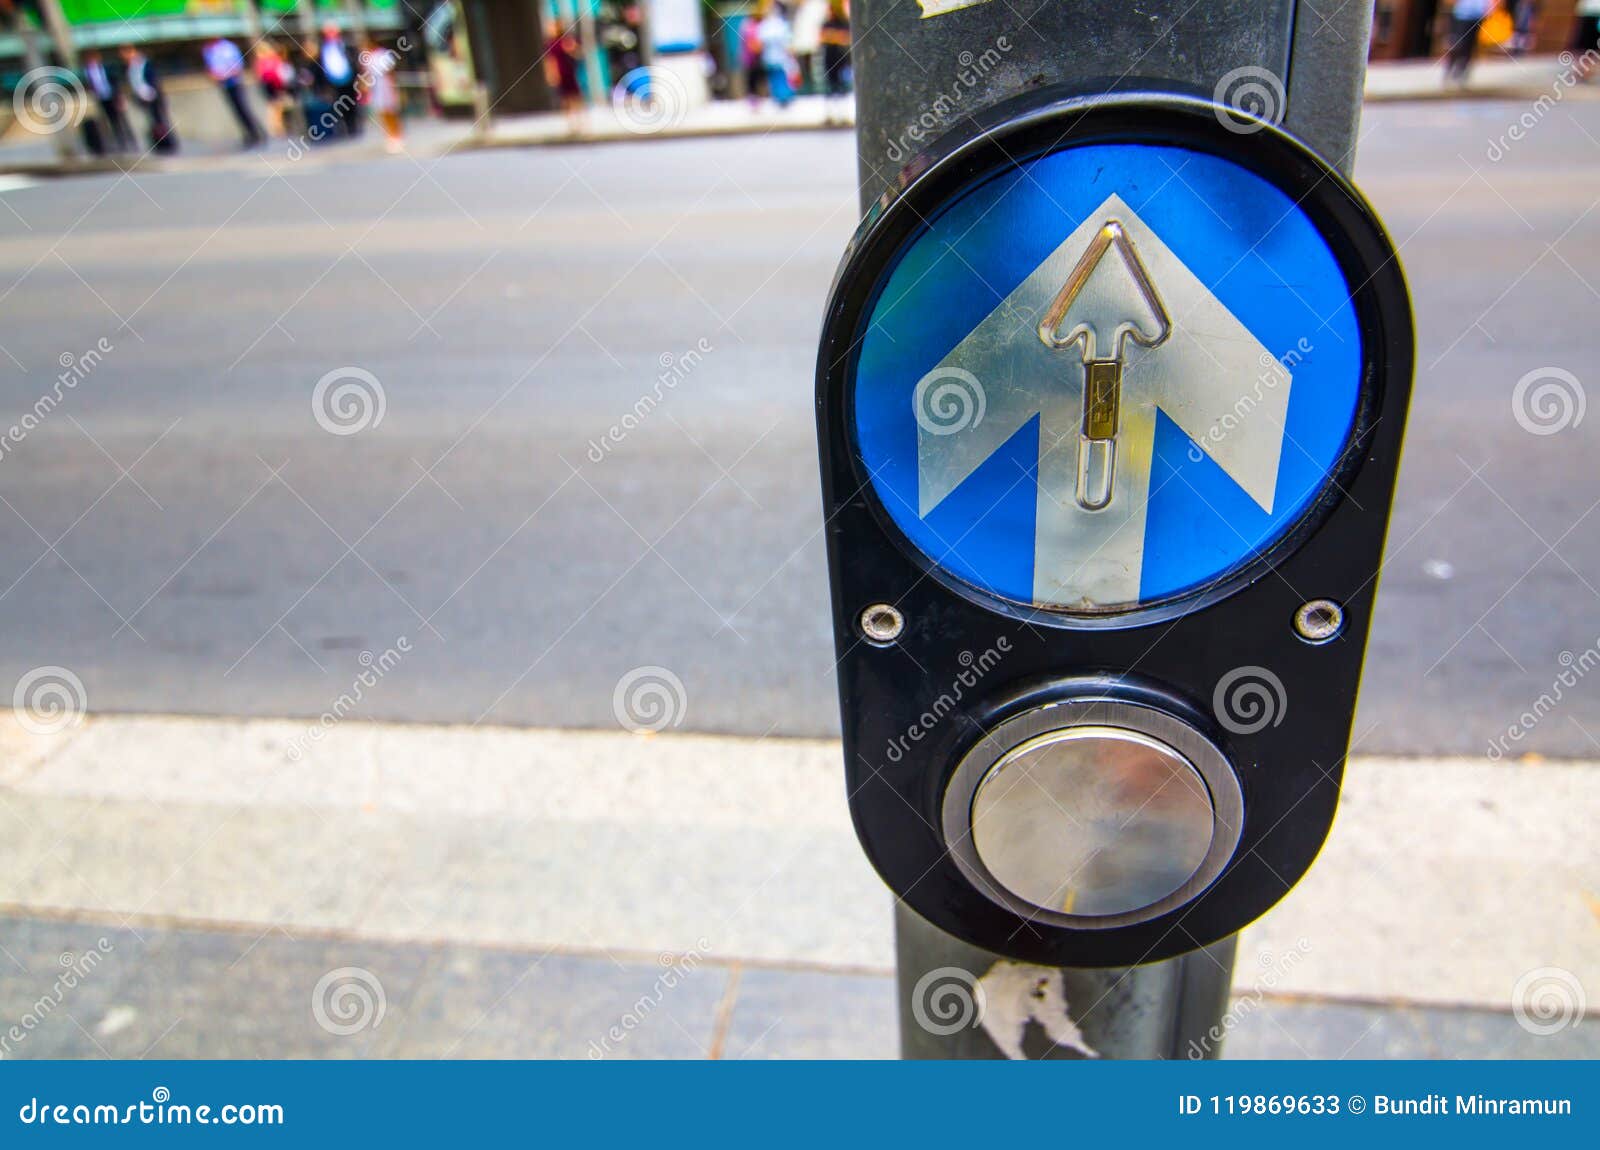 pedestrian crossing control button at intersection.